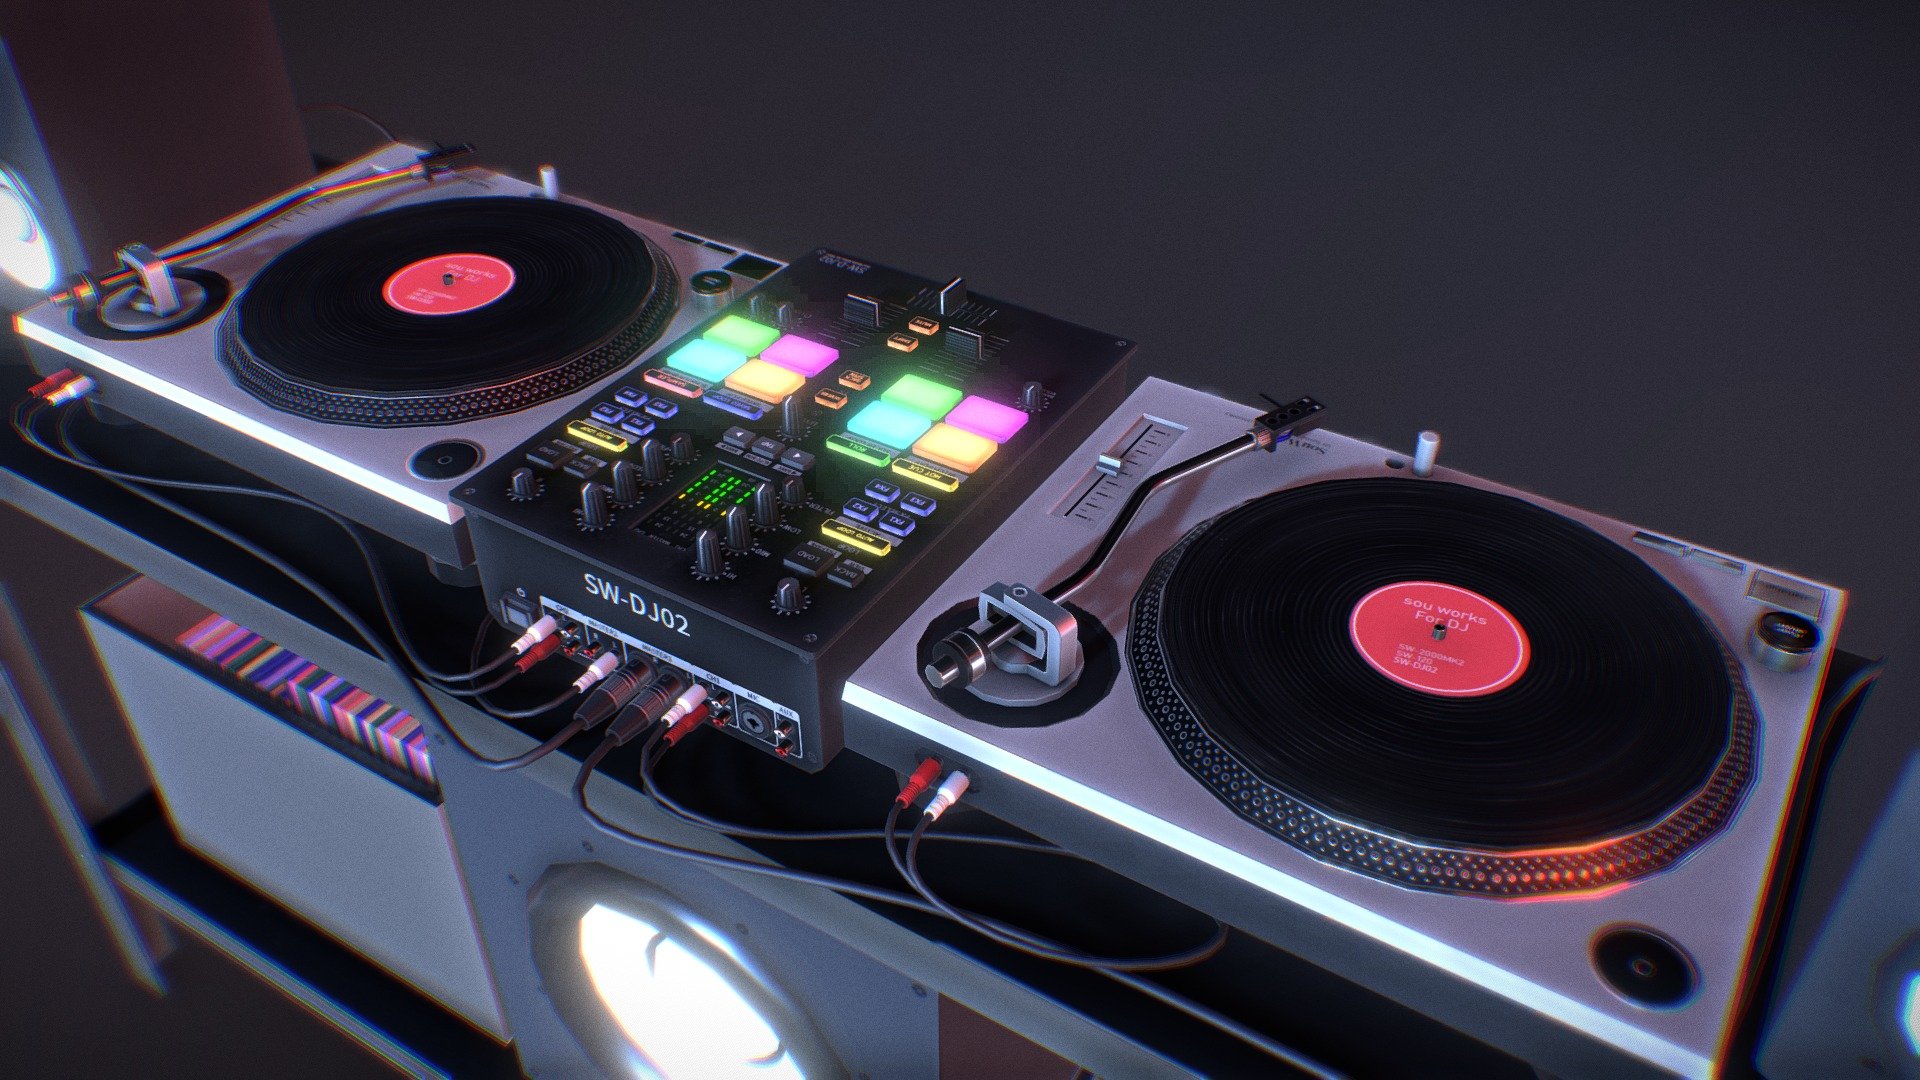 This DJ set was designed for use with VRChat.
So I tried to keep it to the minimum polygons necessary.
This is an improved version of the DJ booth I made before 3d model